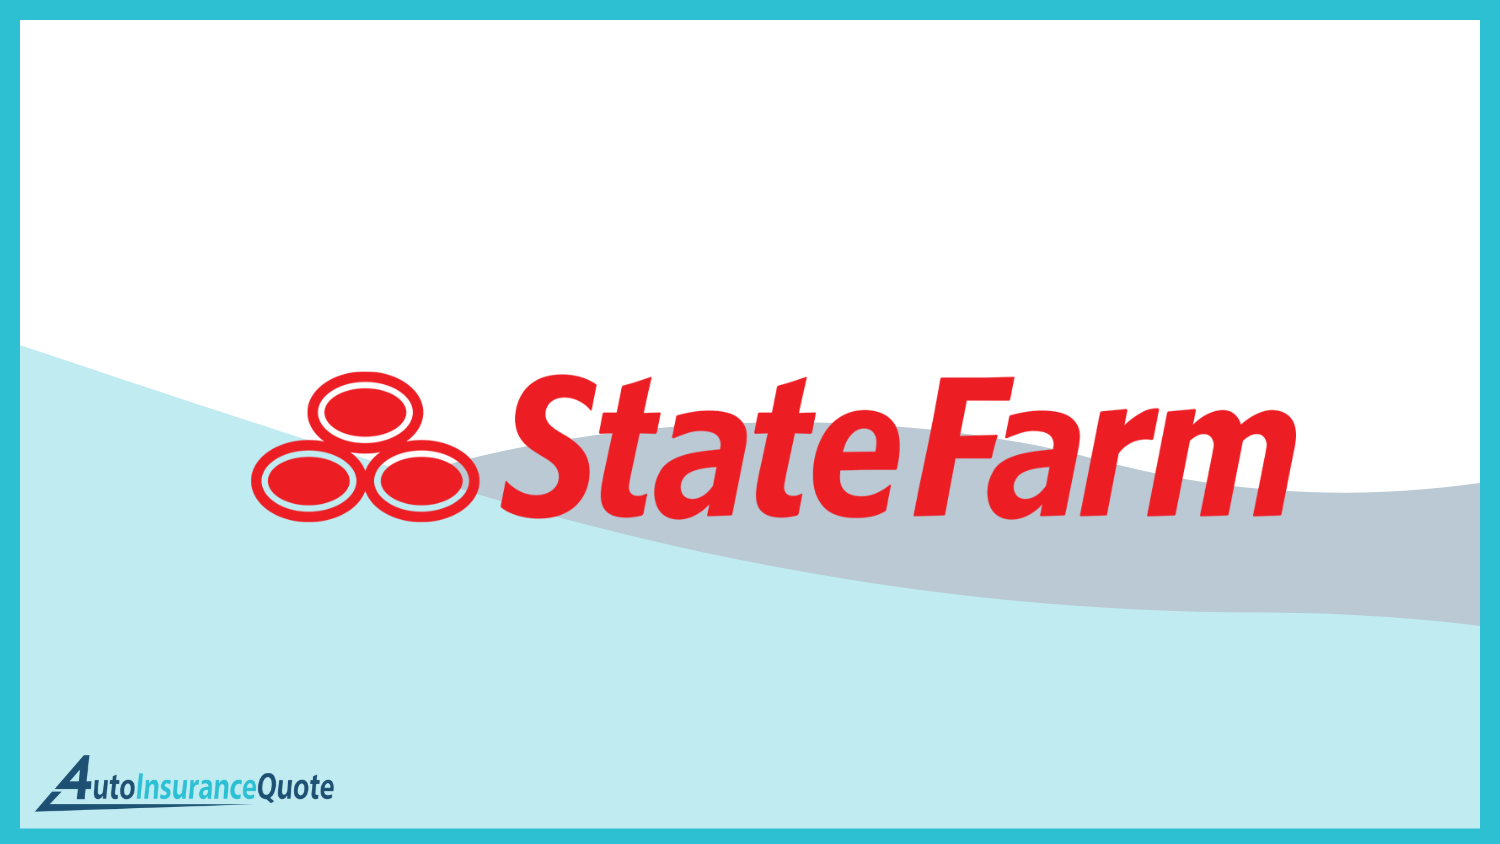 state farm Best Auto Insurance Companies That Do Not Monitor Your Driving